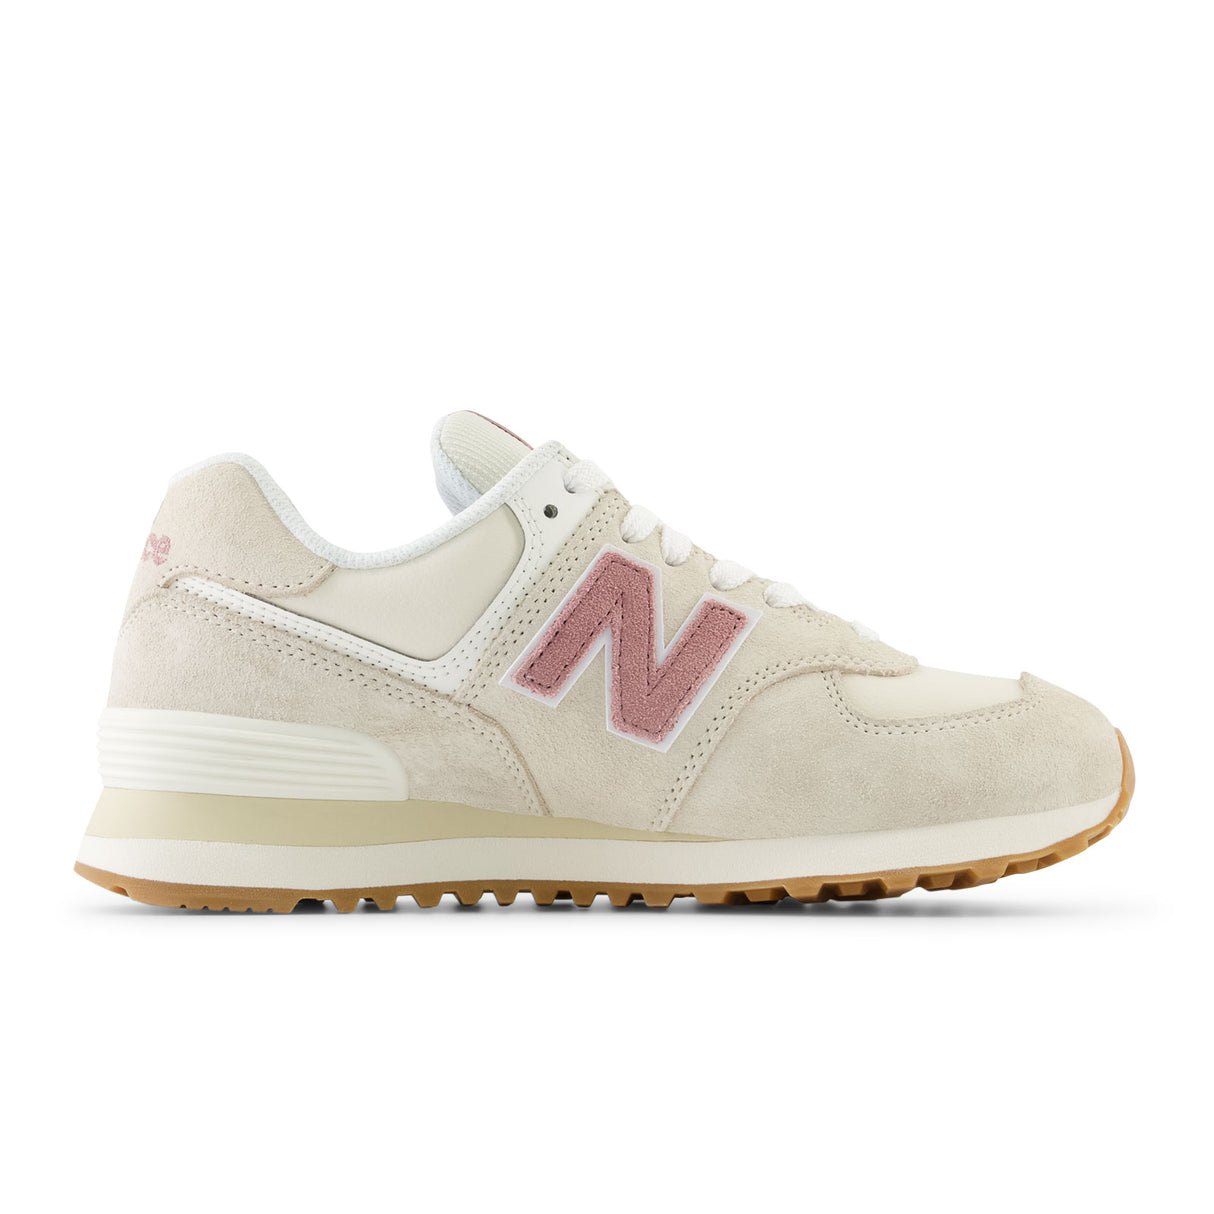 New Balance 574 Sneaker (Women) - Linen/Rosewood Athletic - Casual - Lace Up - The Heel Shoe Fitters